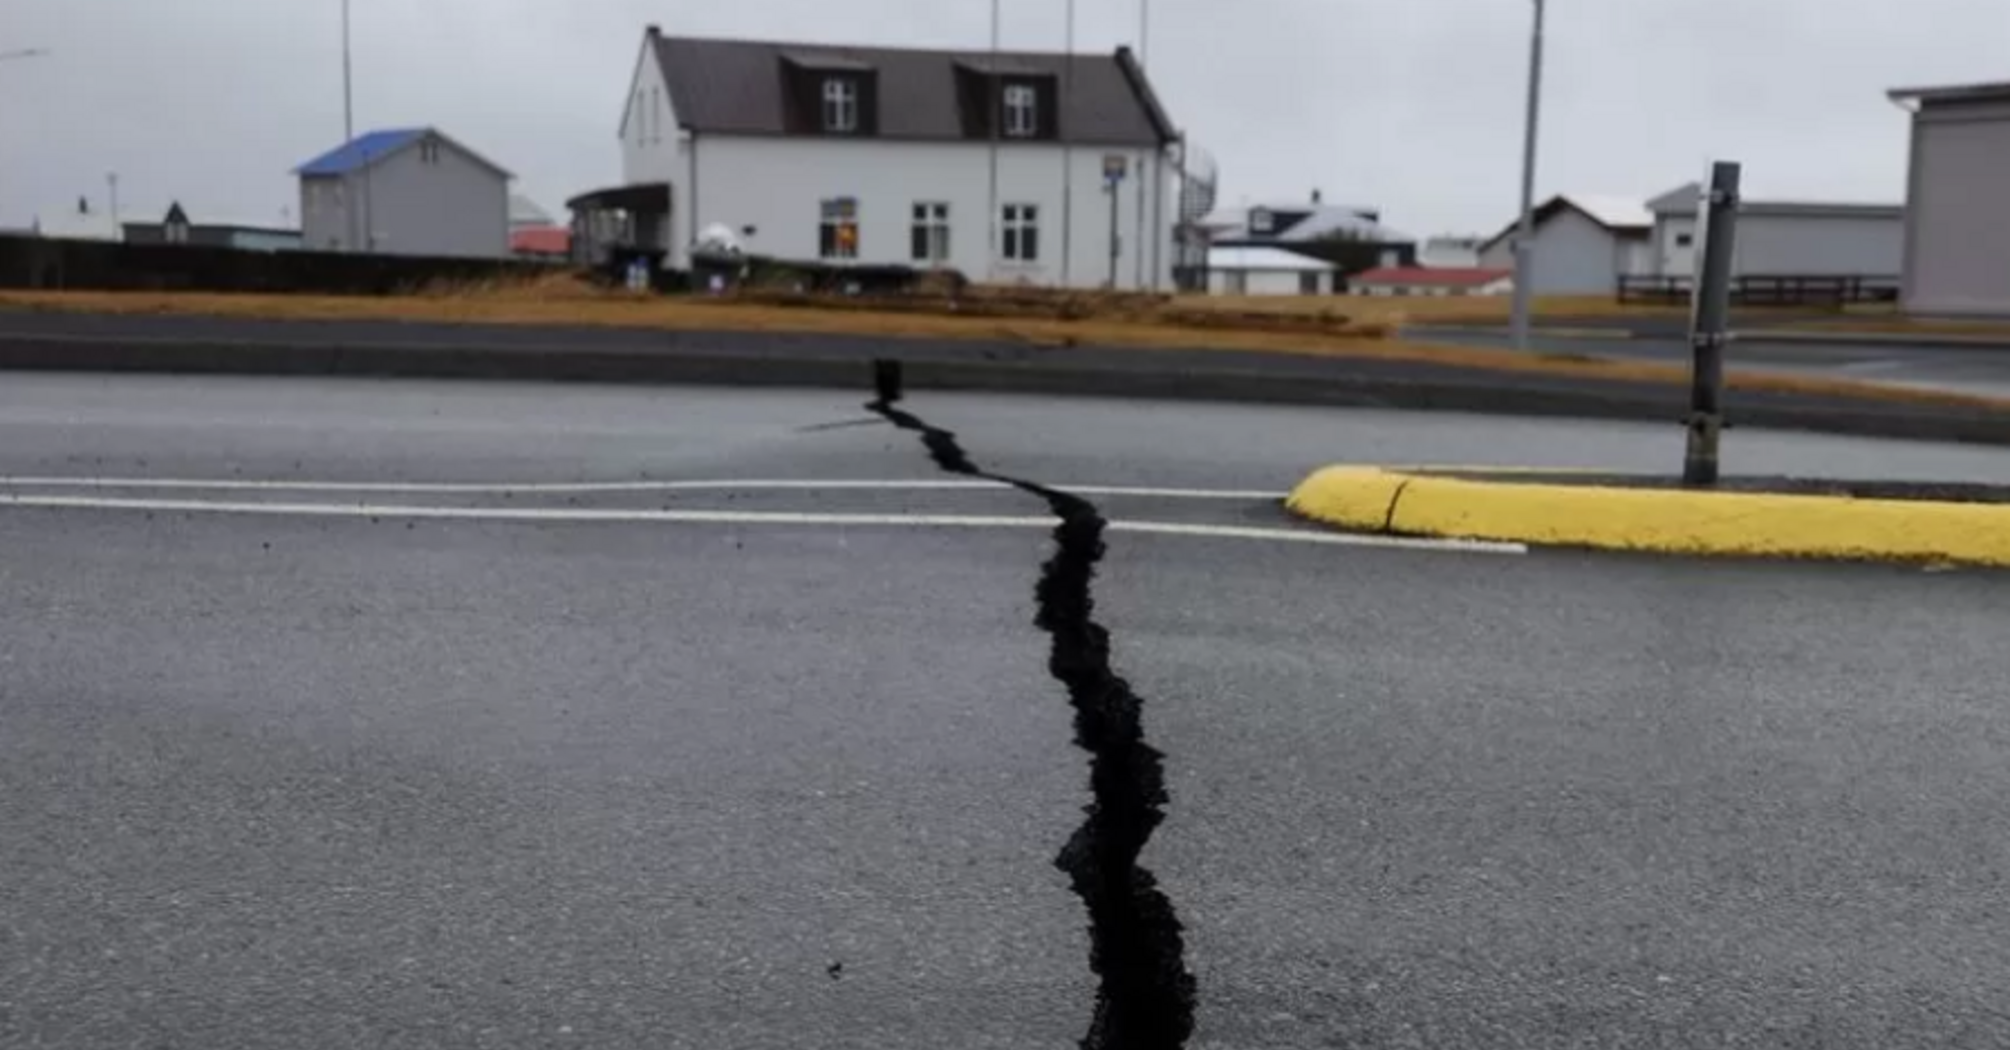 Consequences of the fault in Grindavik